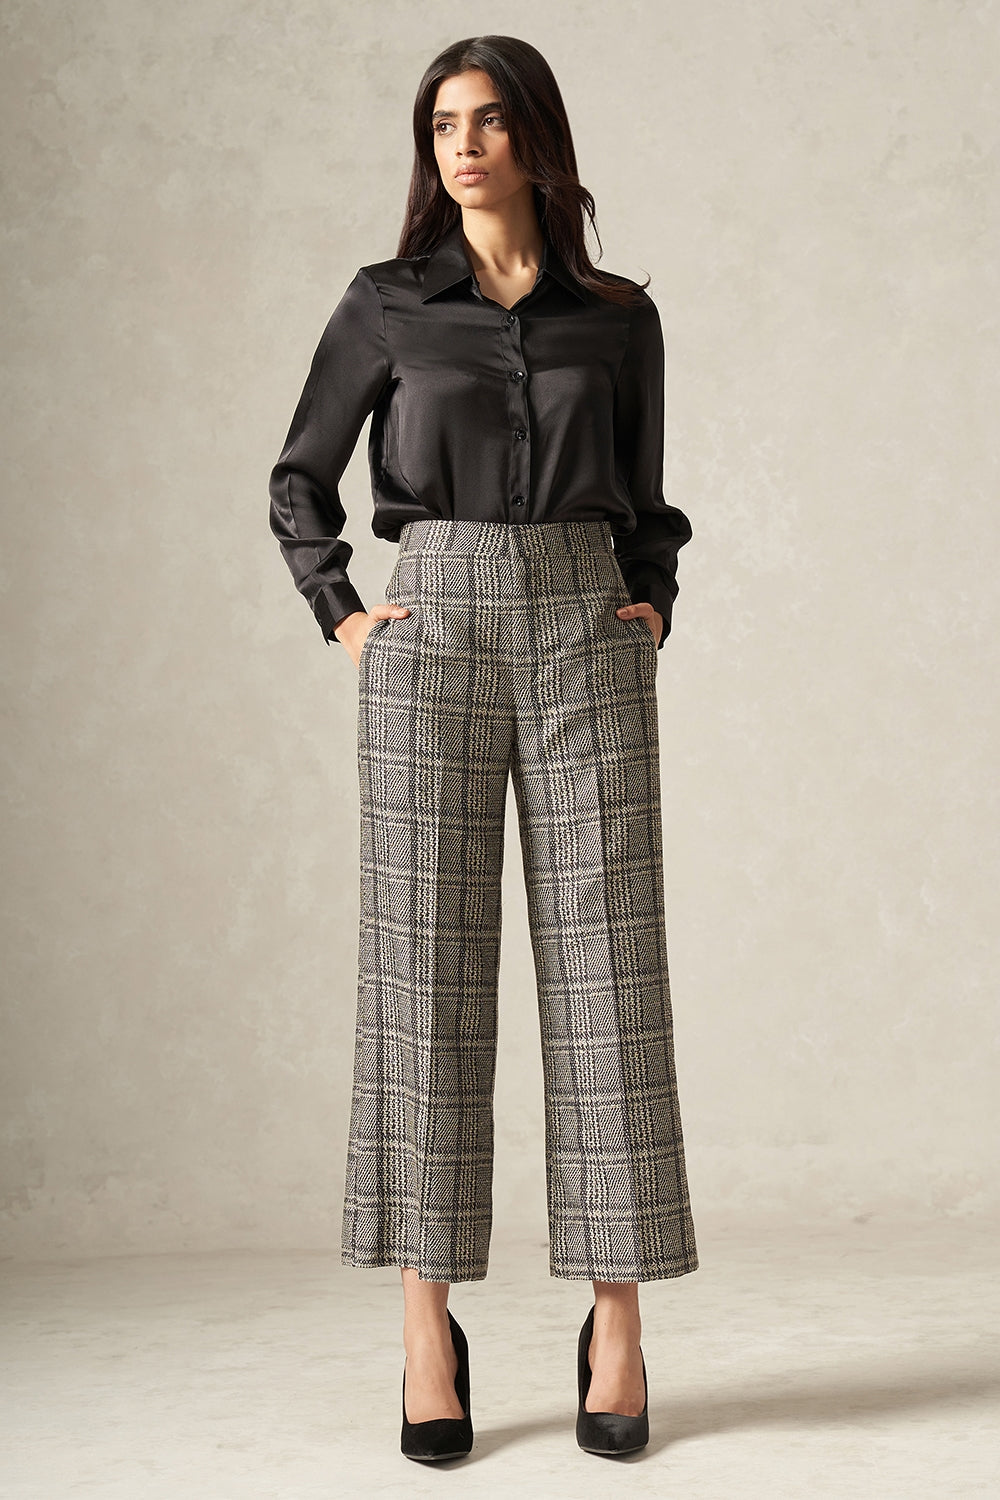 Black and White Pure Silk Handwoven Plaid Patterned Pants